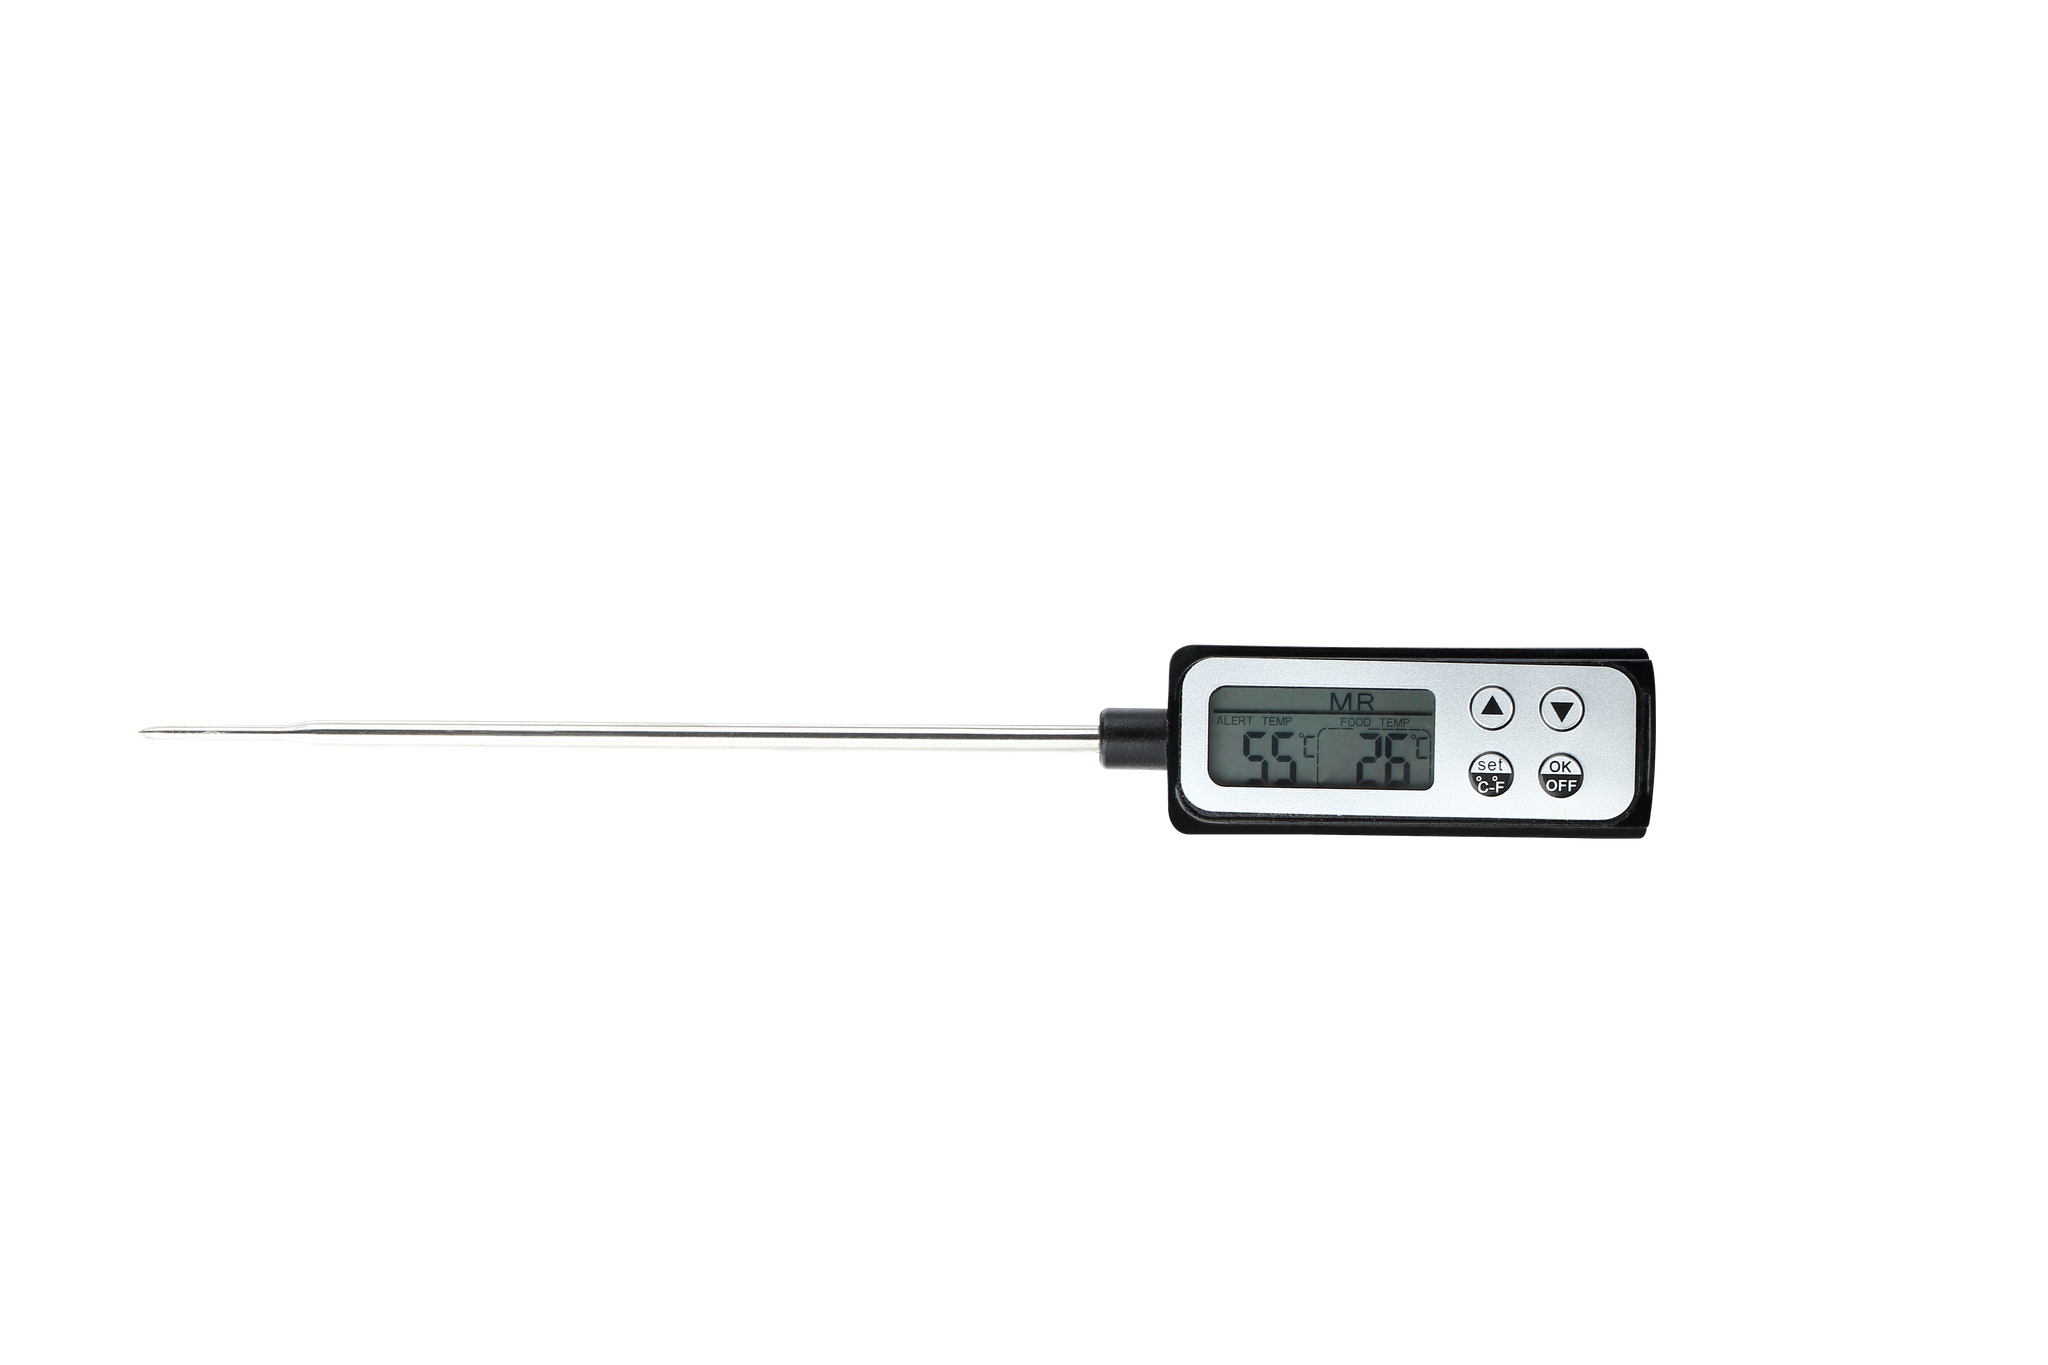 The Temp Master - Digital Food Thermometer – Jean Patrique